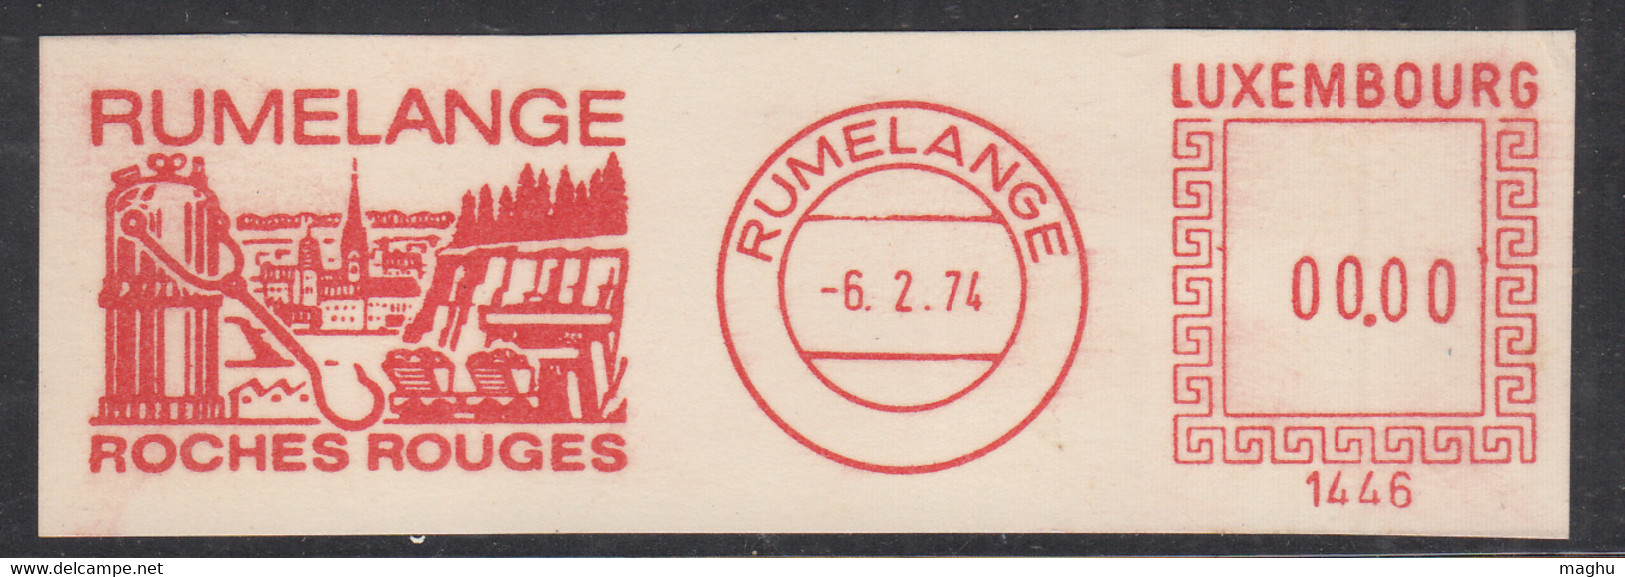 00.00 Value, Trial Meter Cancellation?, ATM Machine Stamp, Luxemburg, Rumelange Rochhes Rouges, Mineral, Mining Tools, - Franking Machines (EMA)